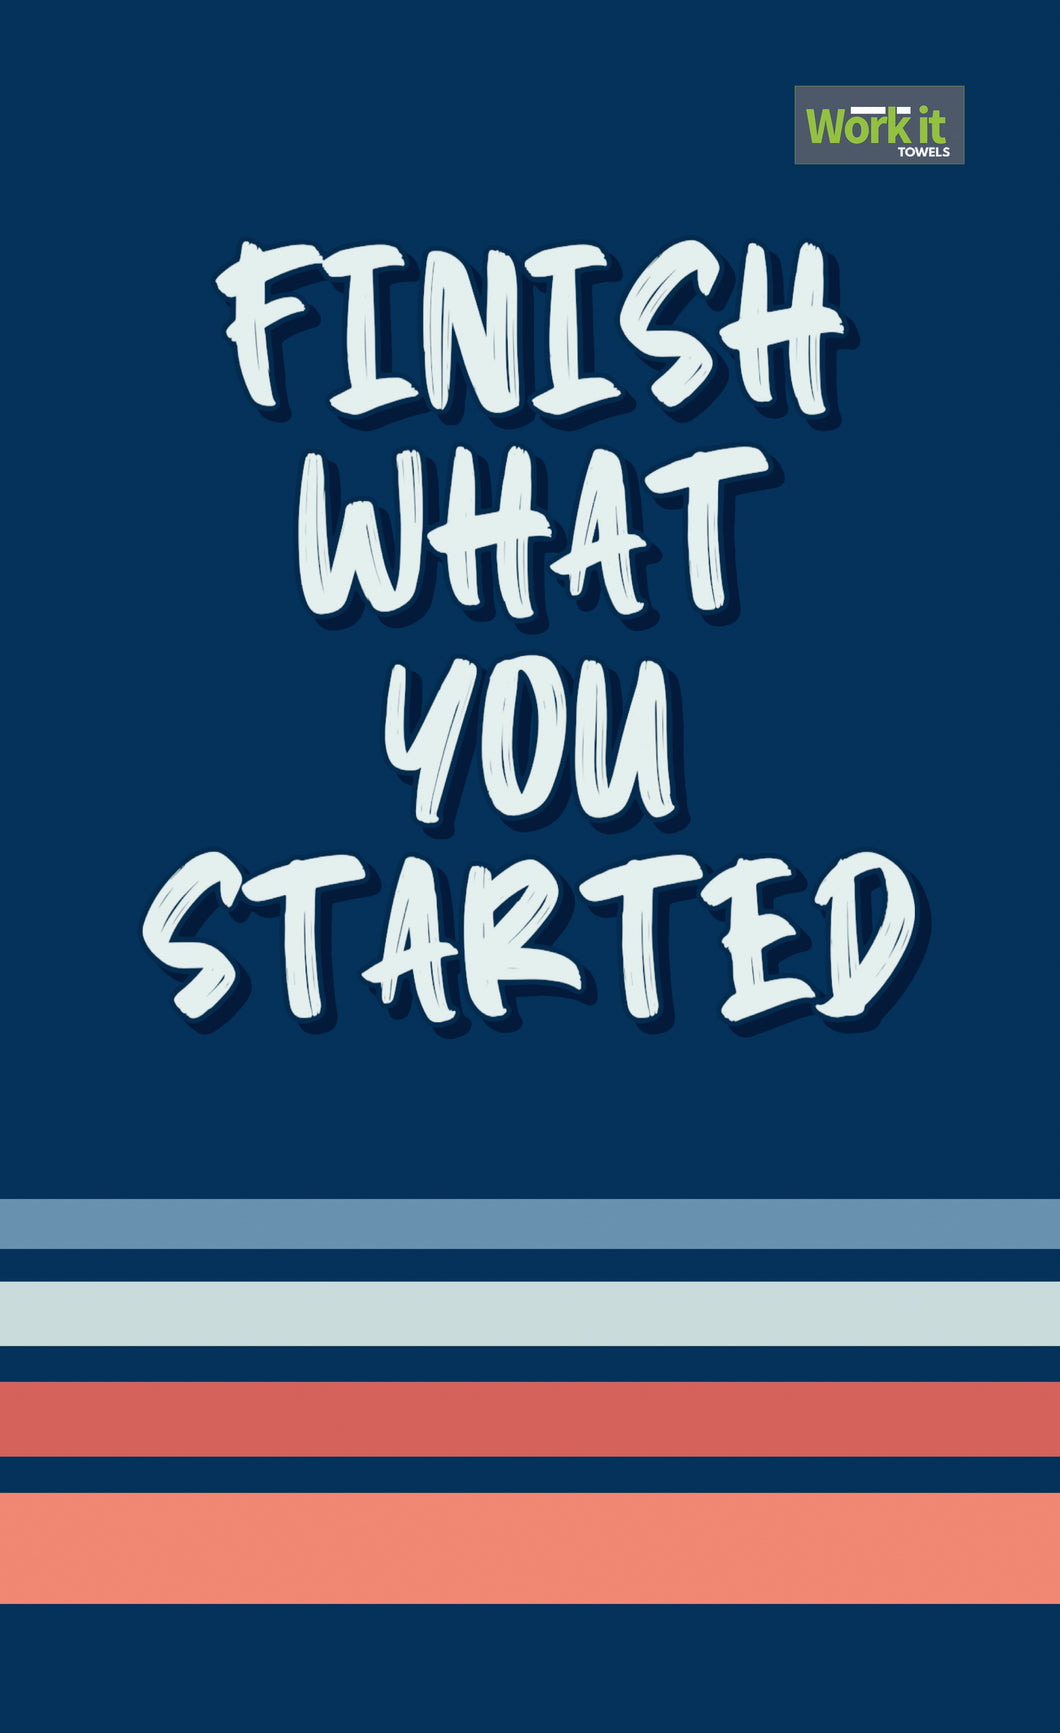 Finish What You Started - work it towels